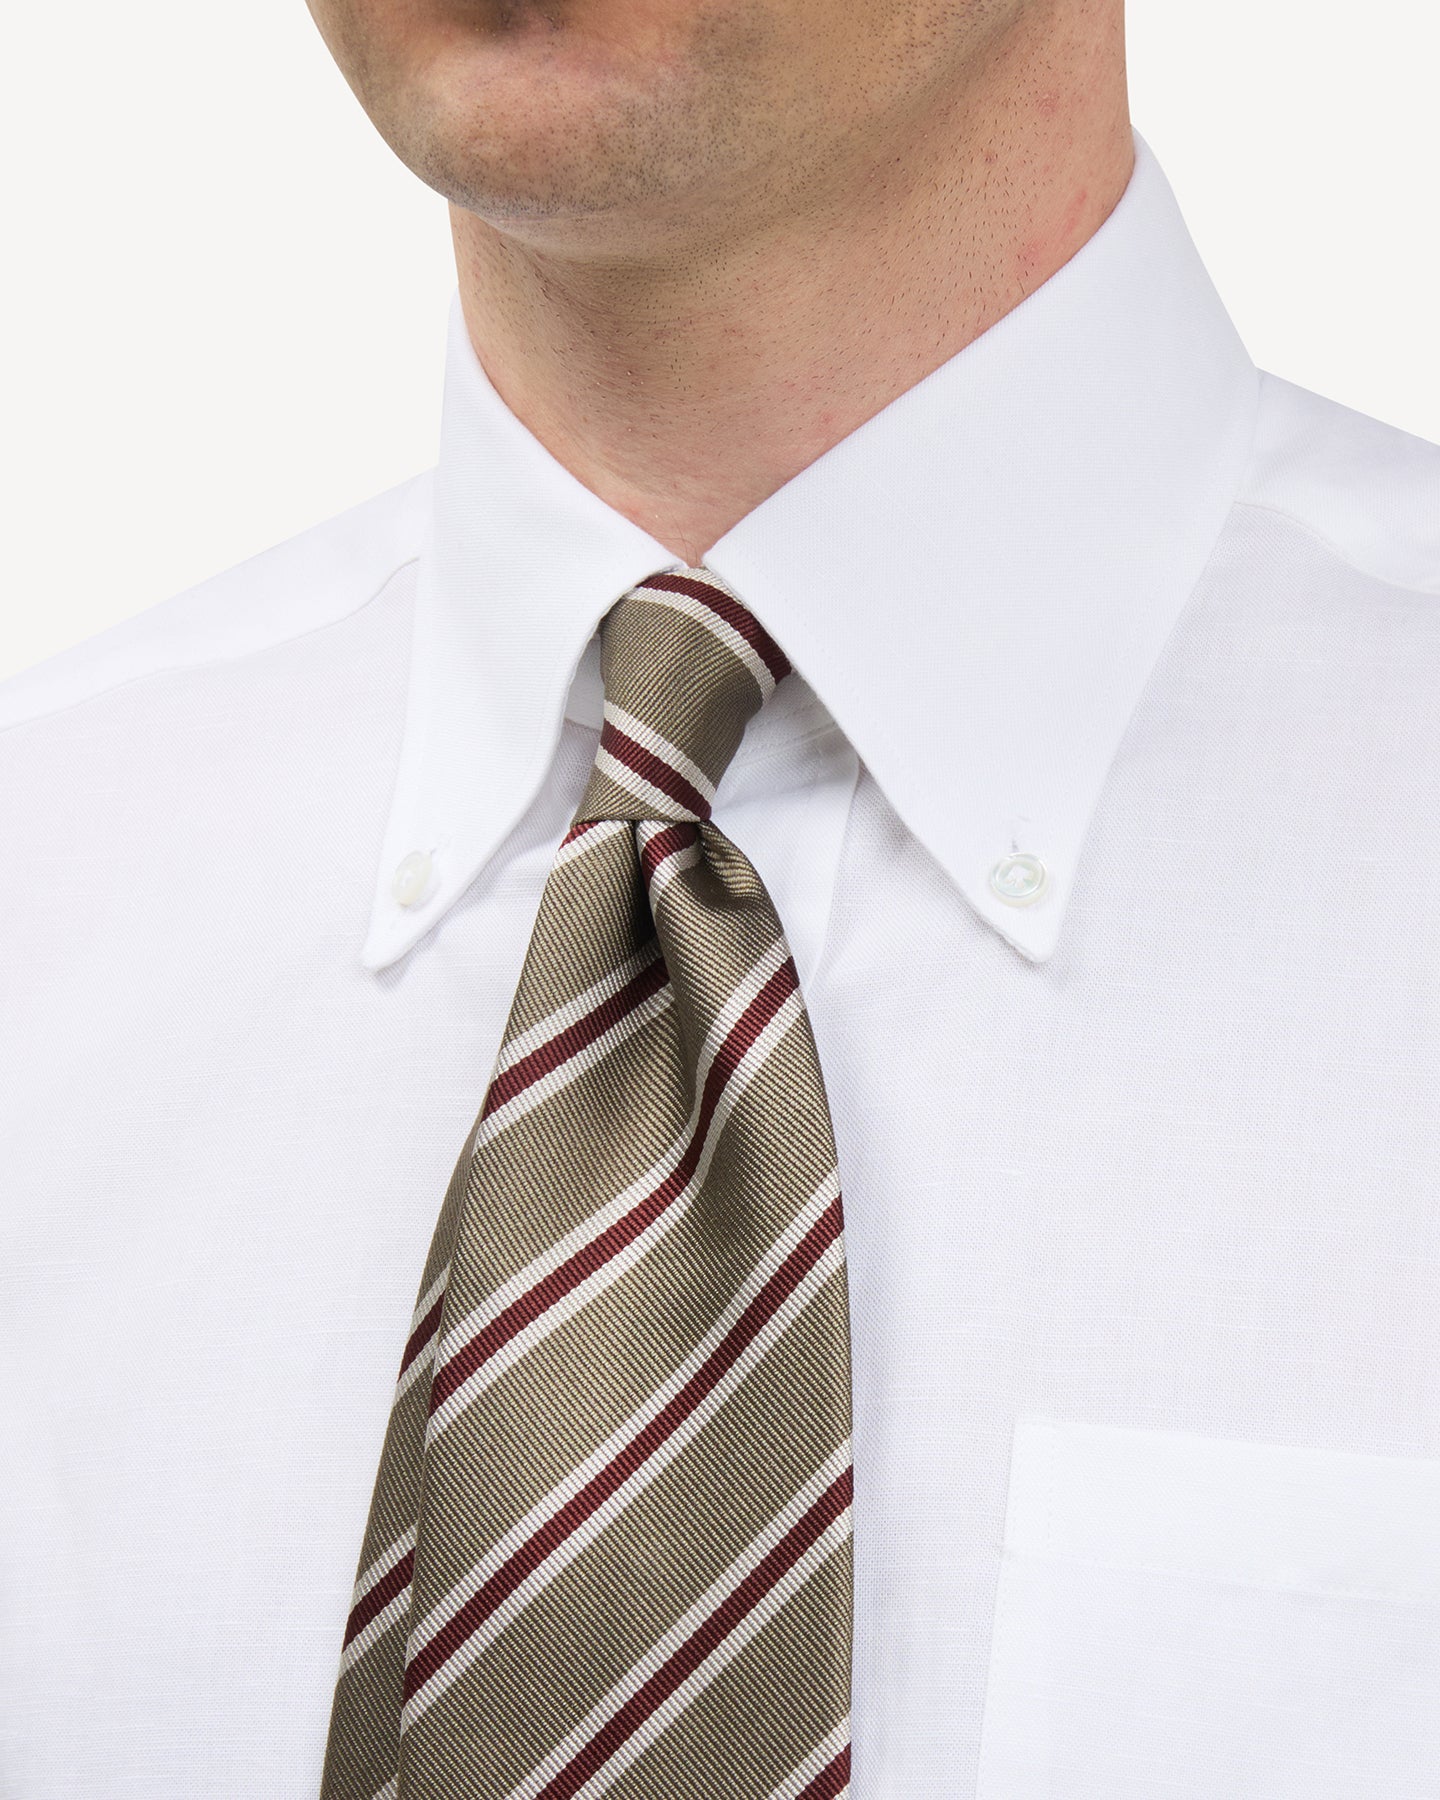 Man wearing a white button down shirt and light green, tan and red regimental stripe repp tie